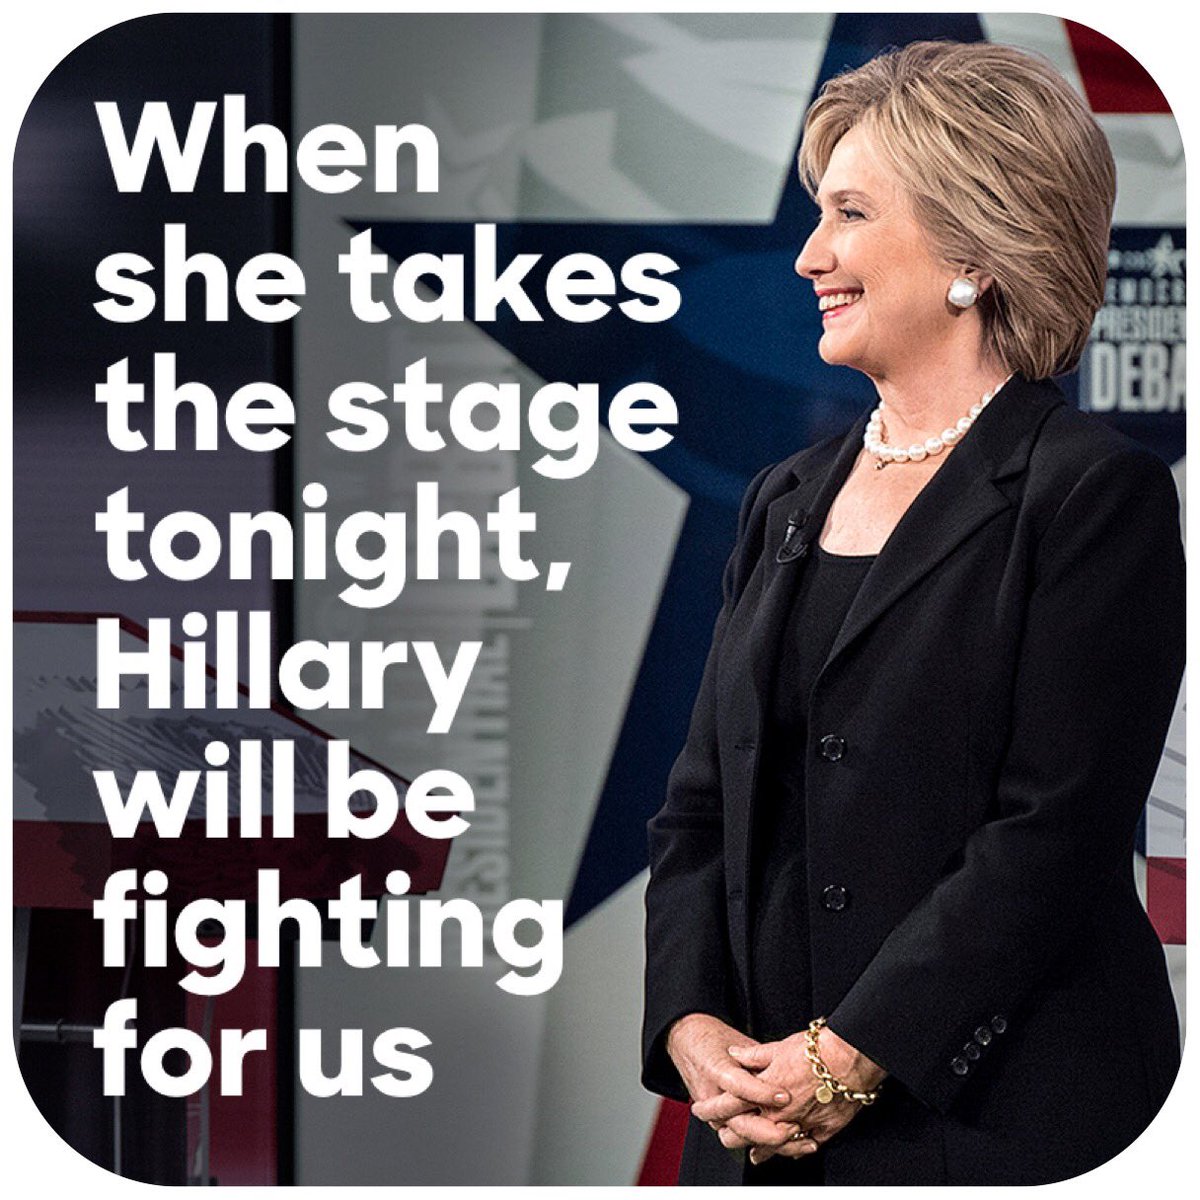 When She Takes The Stage Tonight, Hillary Will Be Fighting For ALL Of Us! #Debates2016 #HillaryQualified #SheWinsWeWin #LoveTrumpsHate 🇺🇸💙🇺🇸